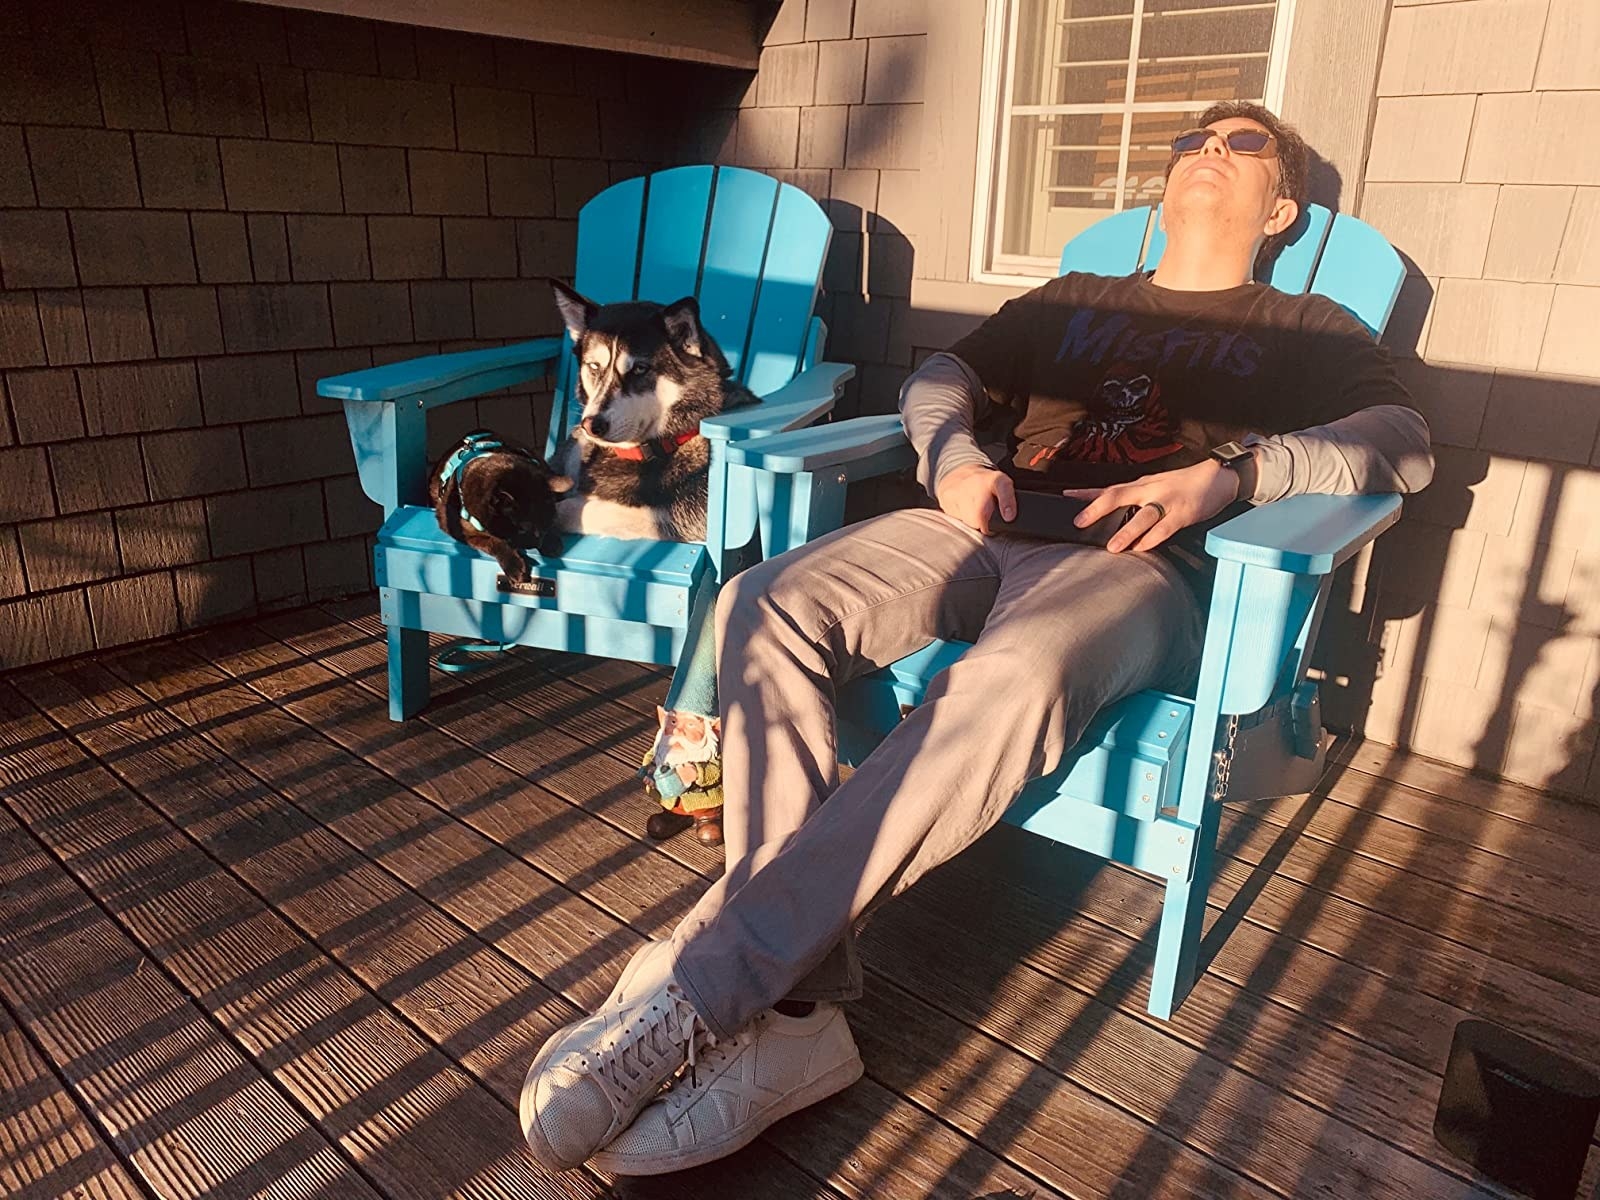 Reviewer and their dog sit comfortably in a pair of teal outdoor chairs